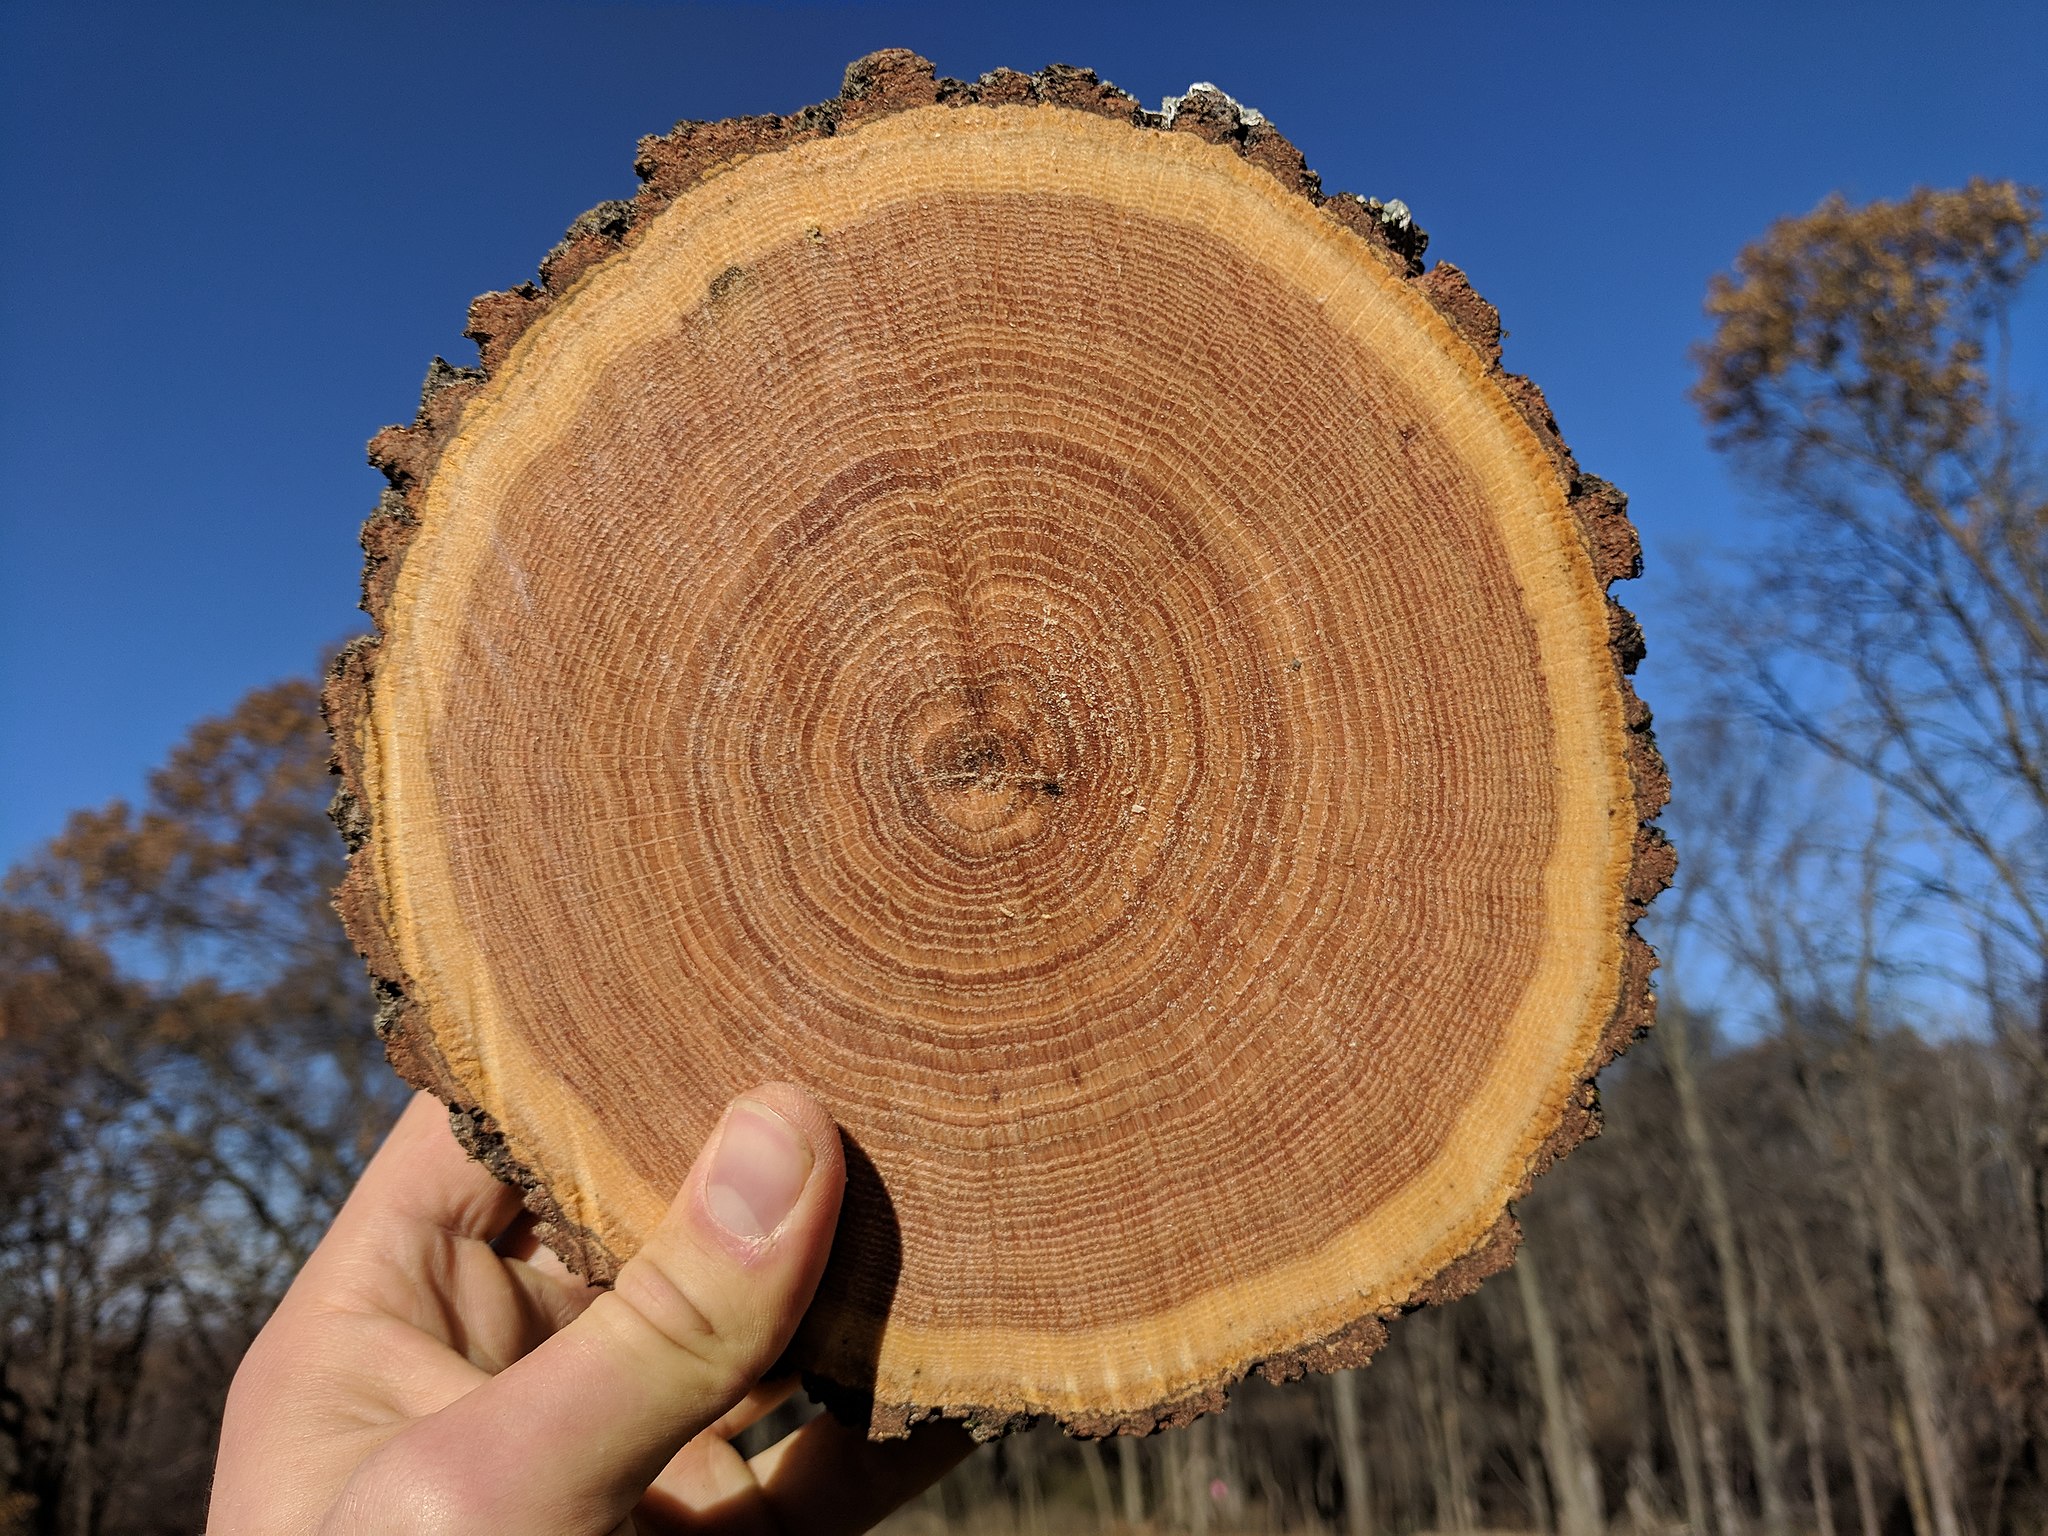 The Most Devastating Solar Storms in History are Scoured Into Tree Rings